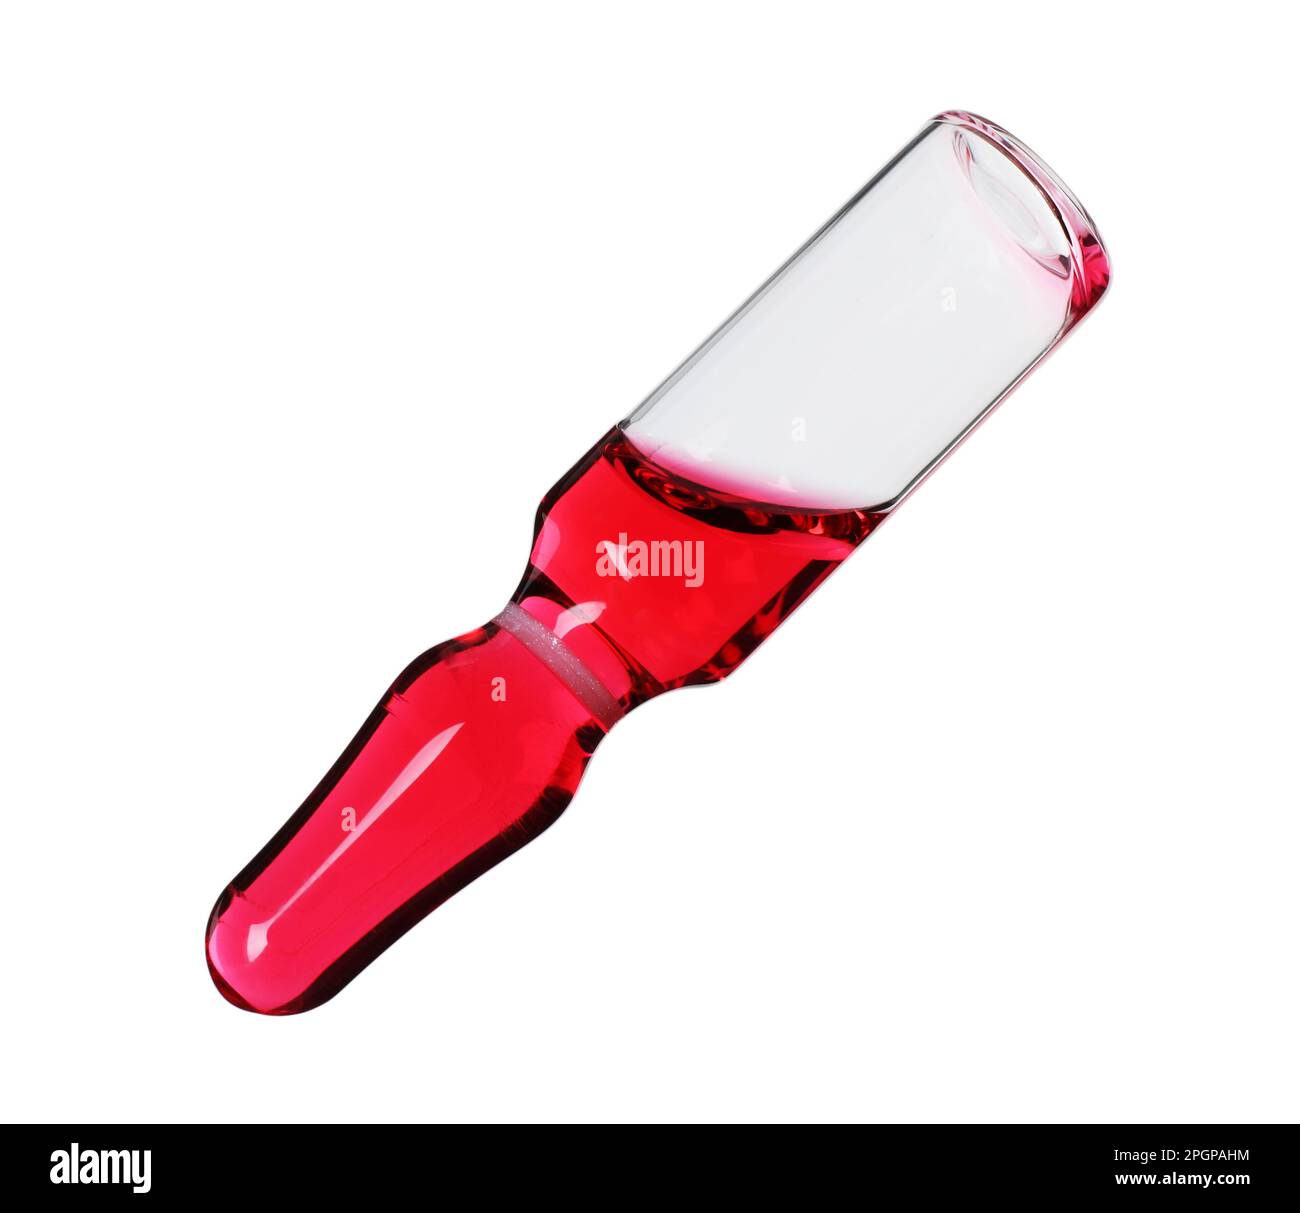 Glass ampoule with pharmaceutical product on white background Stock Photo